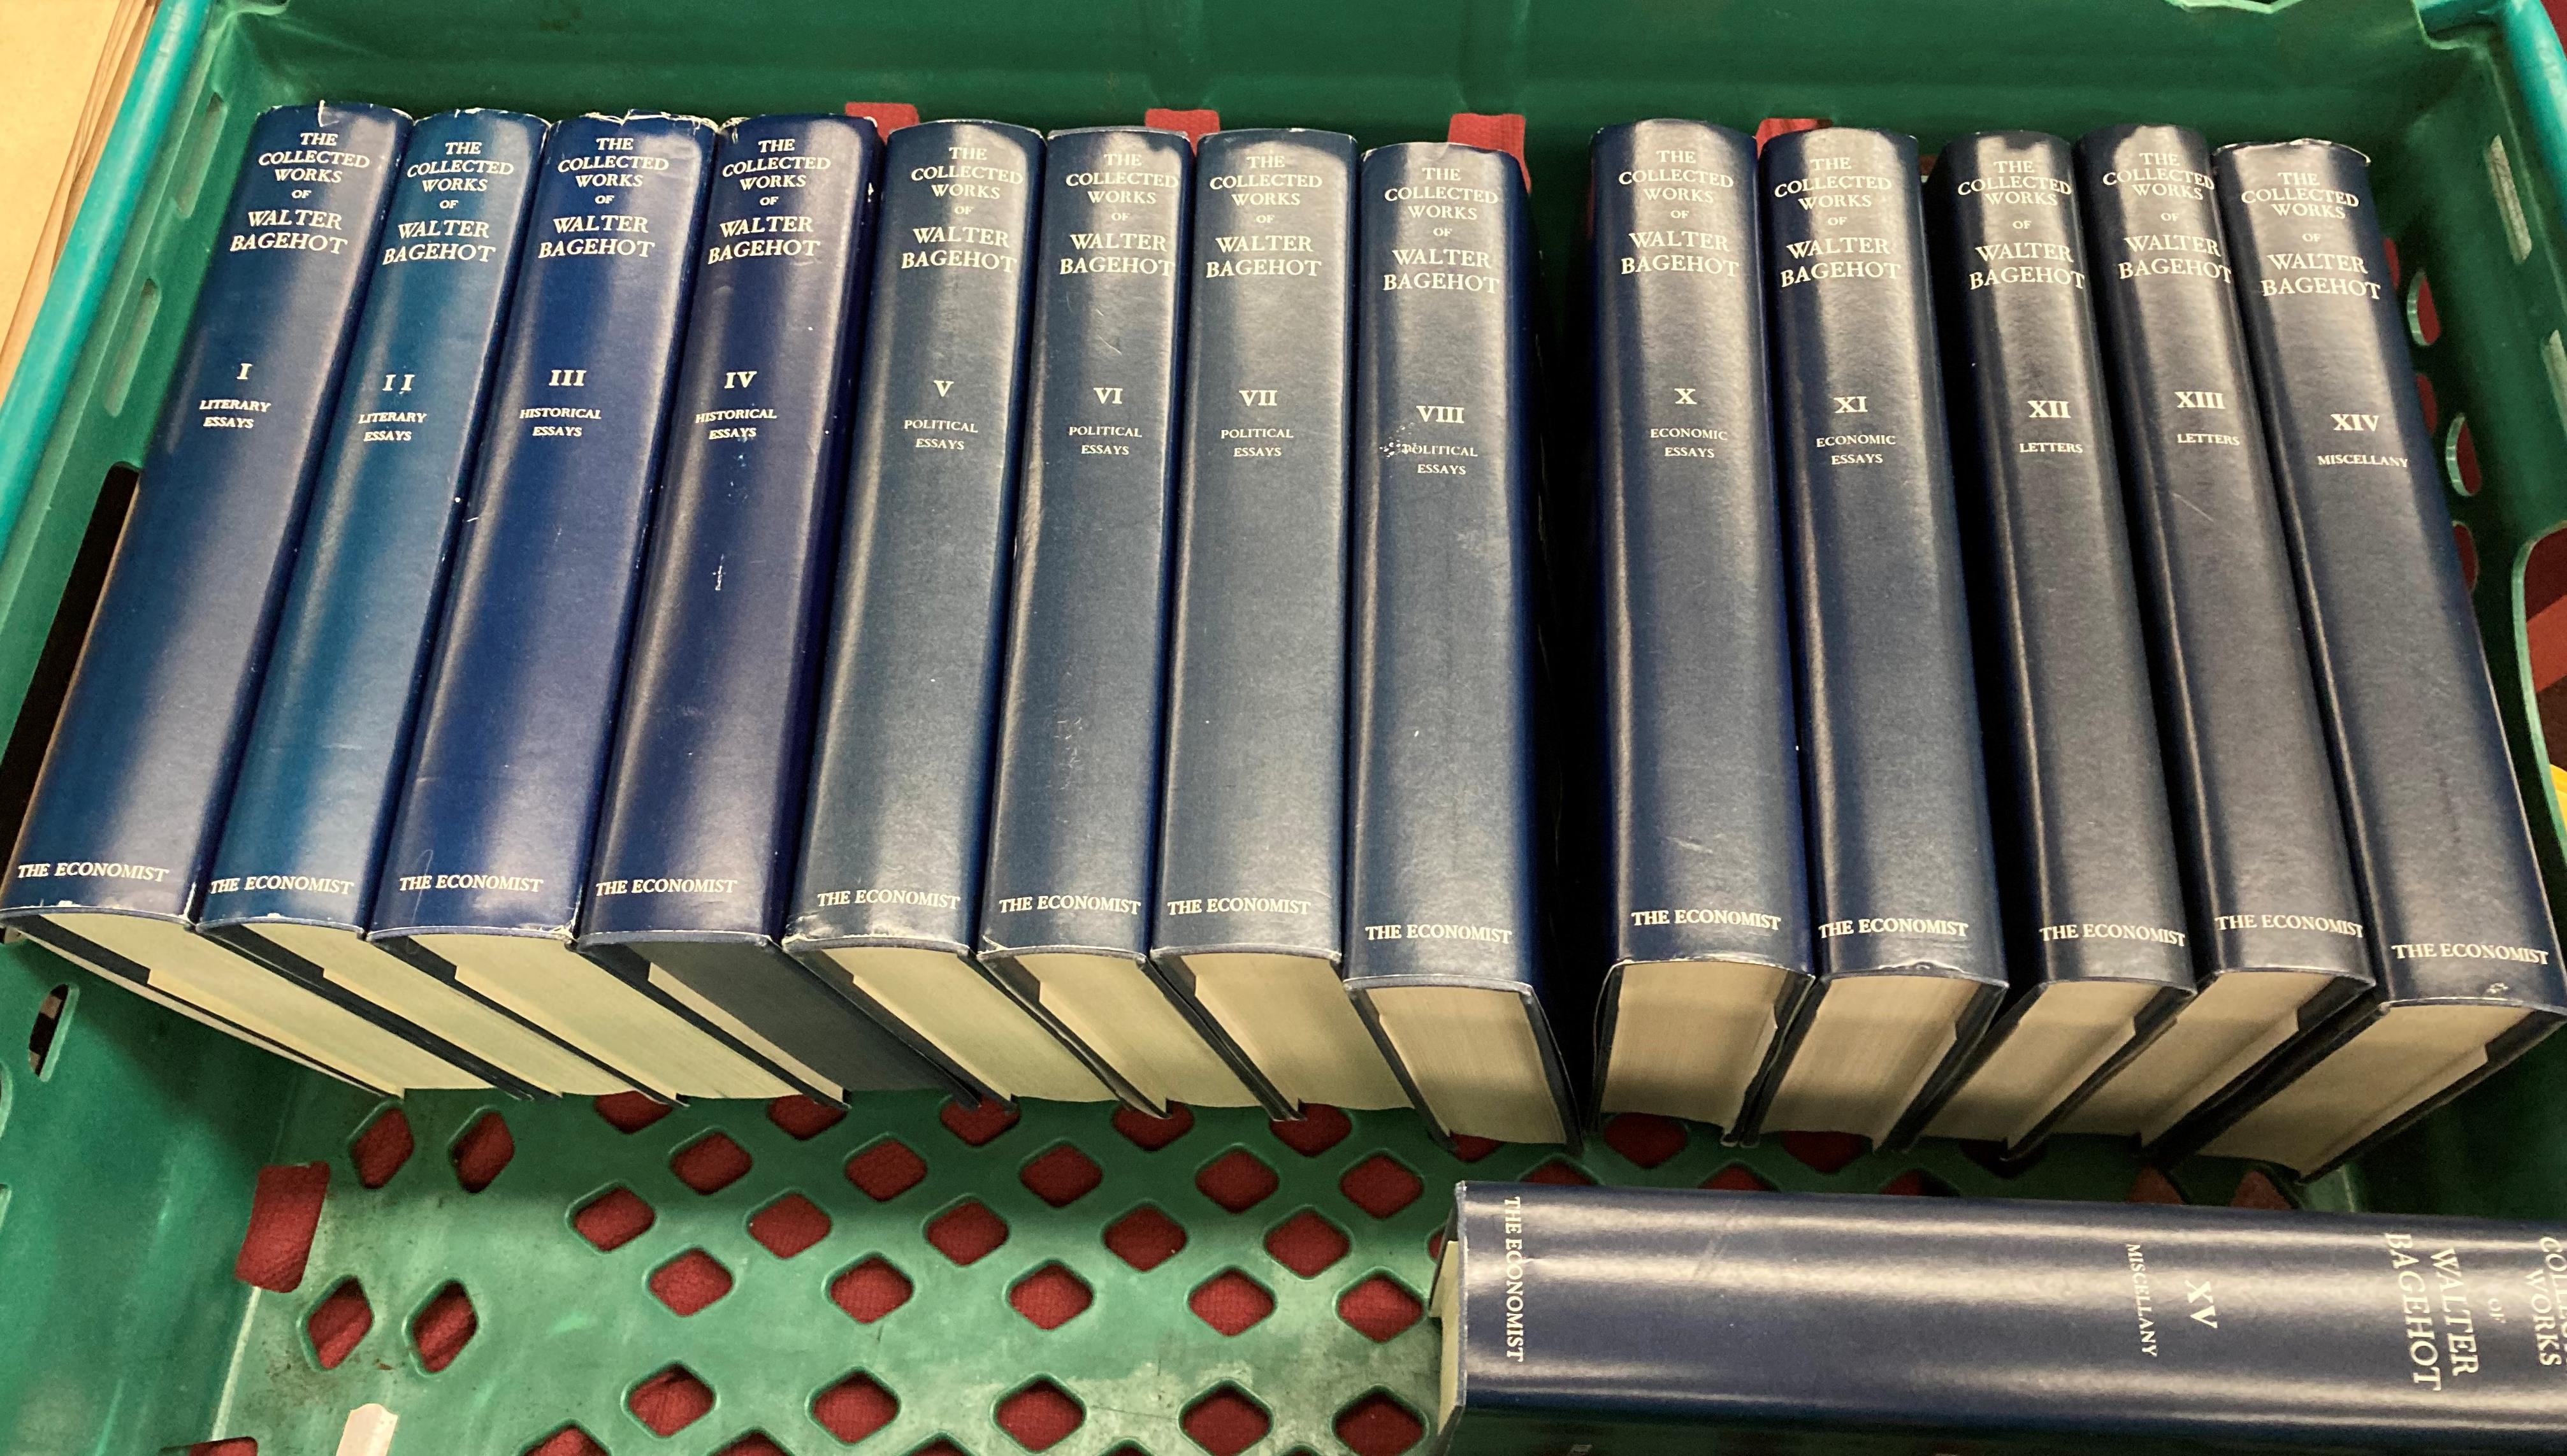 Fourteen volumes 'The Collective Works of Walter Bagehot' (volume IX missing) edited by Norman St